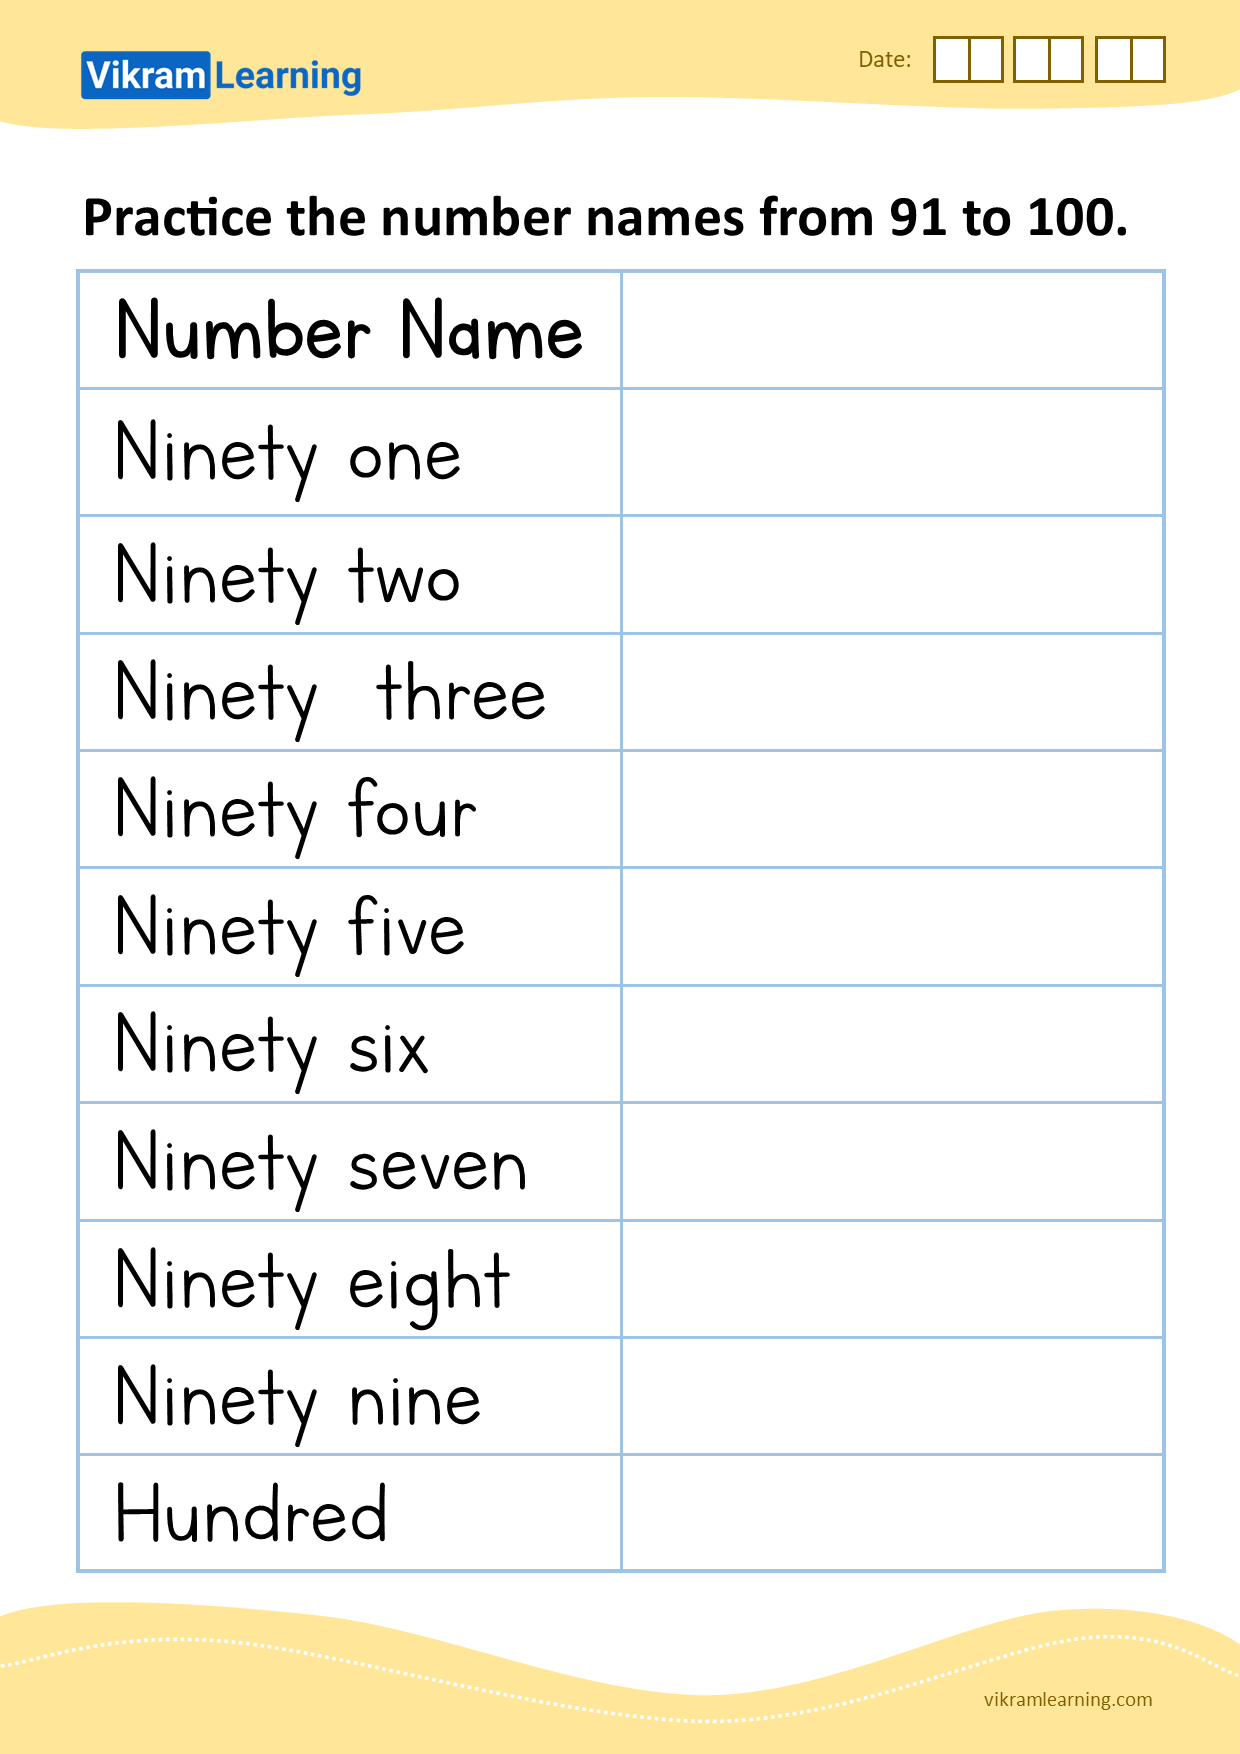 download-practice-the-number-names-from-91-to-100-worksheets-vikramlearning